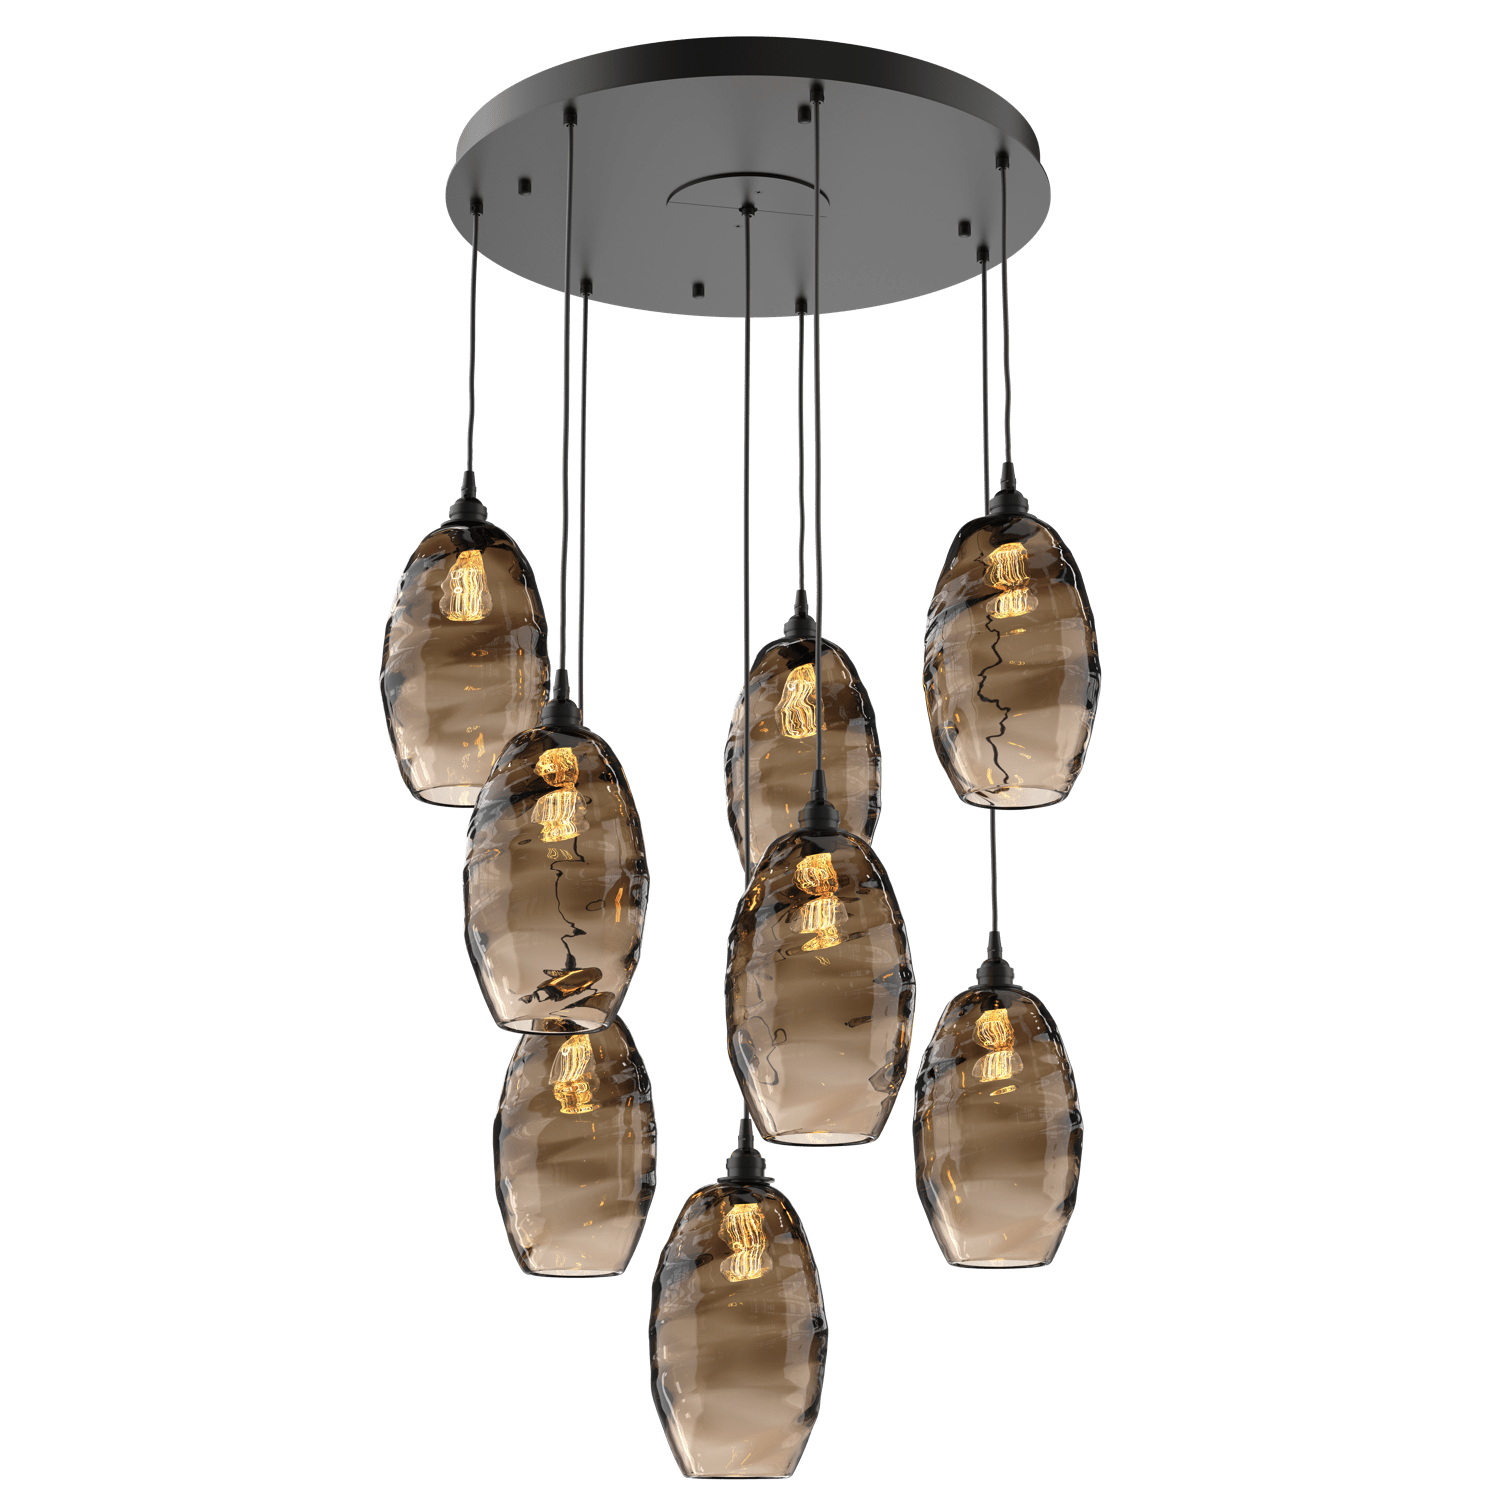 CHB0035-08-MB-OB-Hammerton-Studio-Optic-Blown-Glass-Elisse-8-light-round-pendant-chandelier-with-matte-black-finish-and-optic-bronze-blown-glass-shades-and-incandescent-lamping